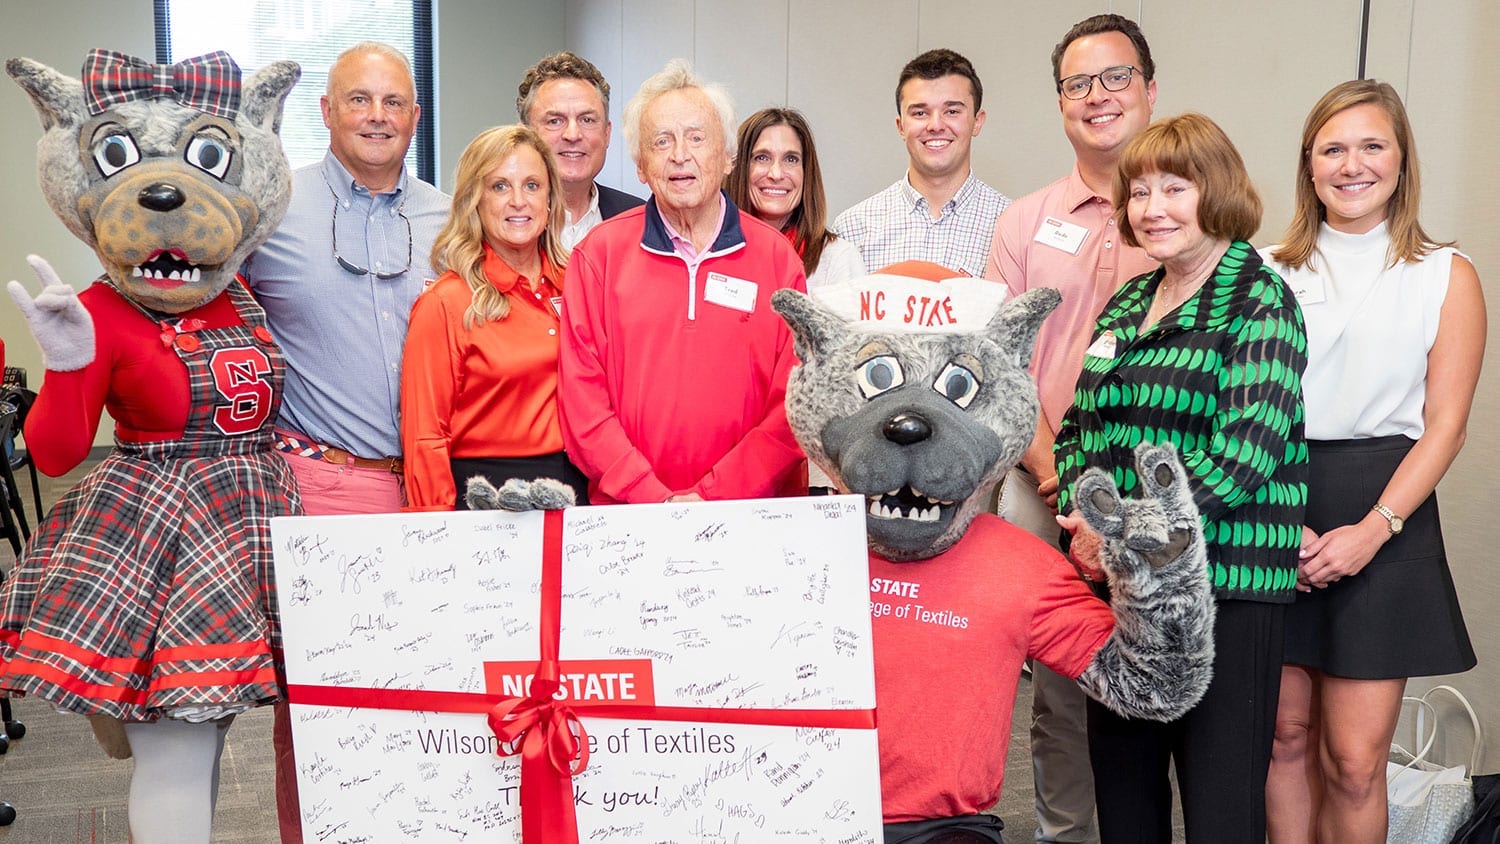 From left: Ms. Wuf, Mike Calabrese, Cres Wilson Calabrese '89, Rick Wilson '87, Fred Wilson '61, Sondra Wilson, Michael Calabrese, Mr. Wuf, Rede Wilson '16, Barbara Wilson and Sarah Butler.